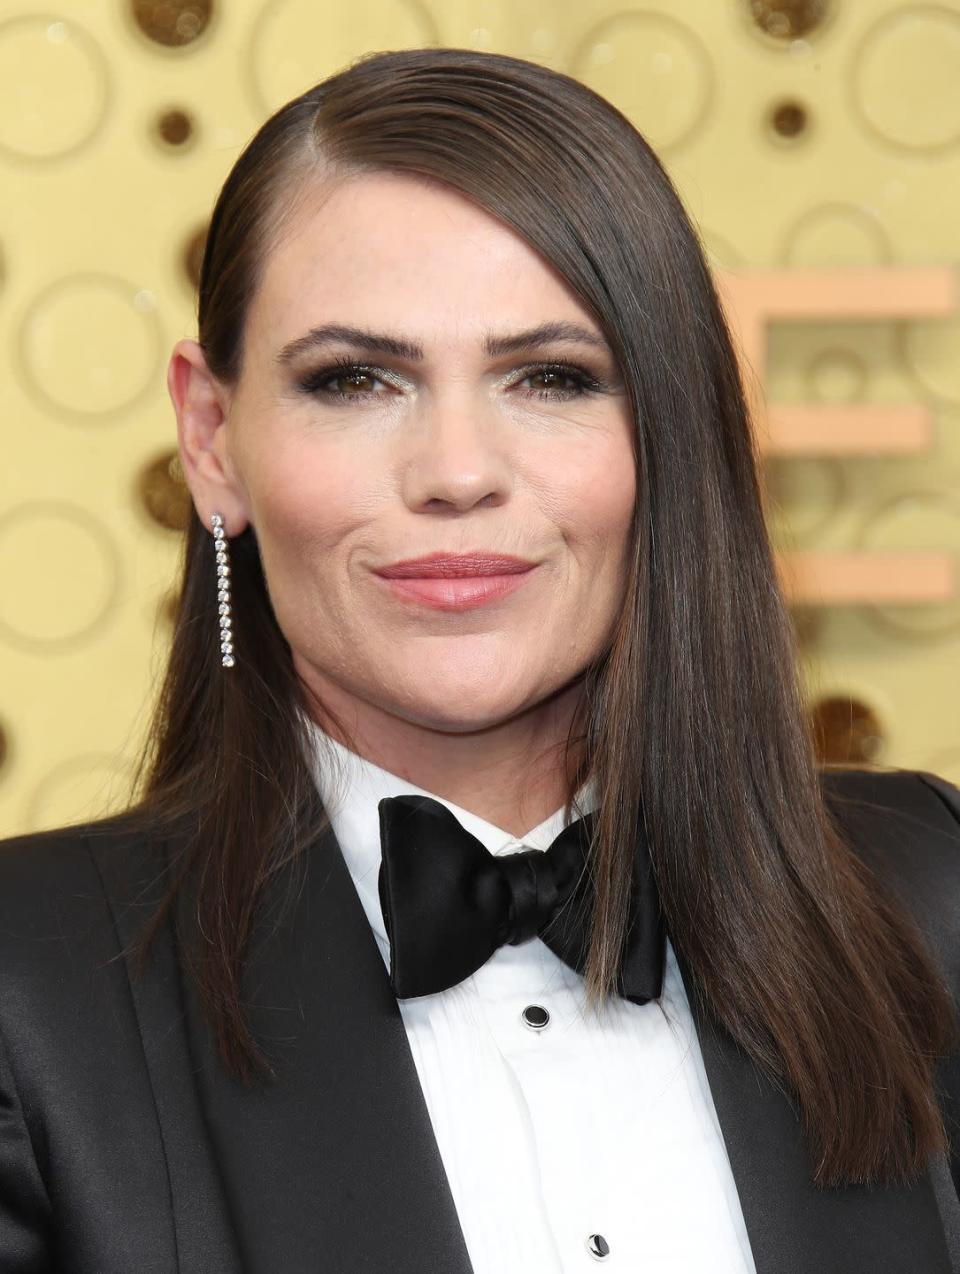 <p>Clea DuVall is an actress, writer, producer, and director. Most recently, she's best known for playing Marjorie Palmiotti, Selina Meyer's Secret Service agent/daughter-in-law, on <em>VEEP</em>. She's also been in some film hits from the '90s, including <em>She's All That </em>and <em><a href="https://www.womenshealthmag.com/life/g35683884/best-lgbtq-movies/" rel="nofollow noopener" target="_blank" data-ylk="slk:But I'm a Cheerleader" class="link ">But I'm a Cheerleader</a>.</em></p>